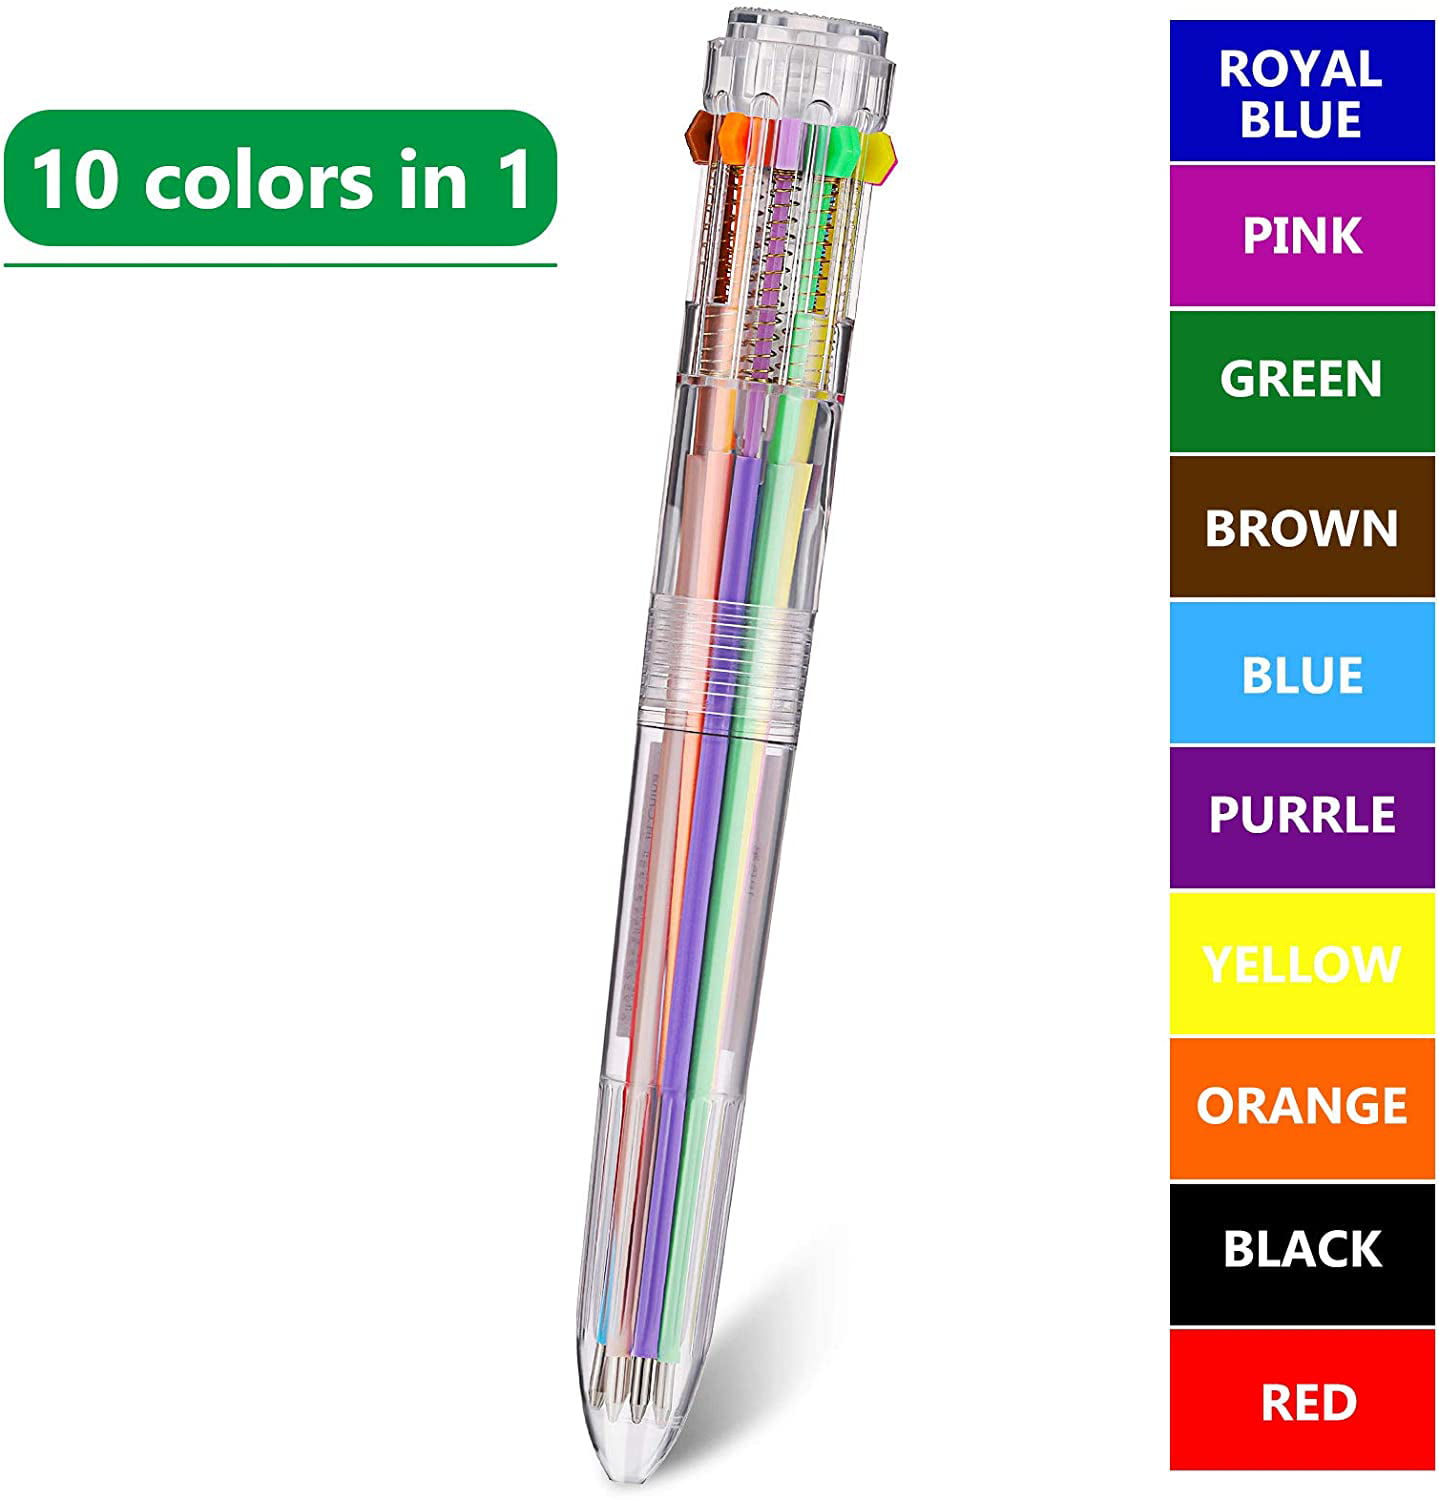 Multicolors 10 in1 Color Ballpoint Pen Ball Point Pens Kids School Office Supply 